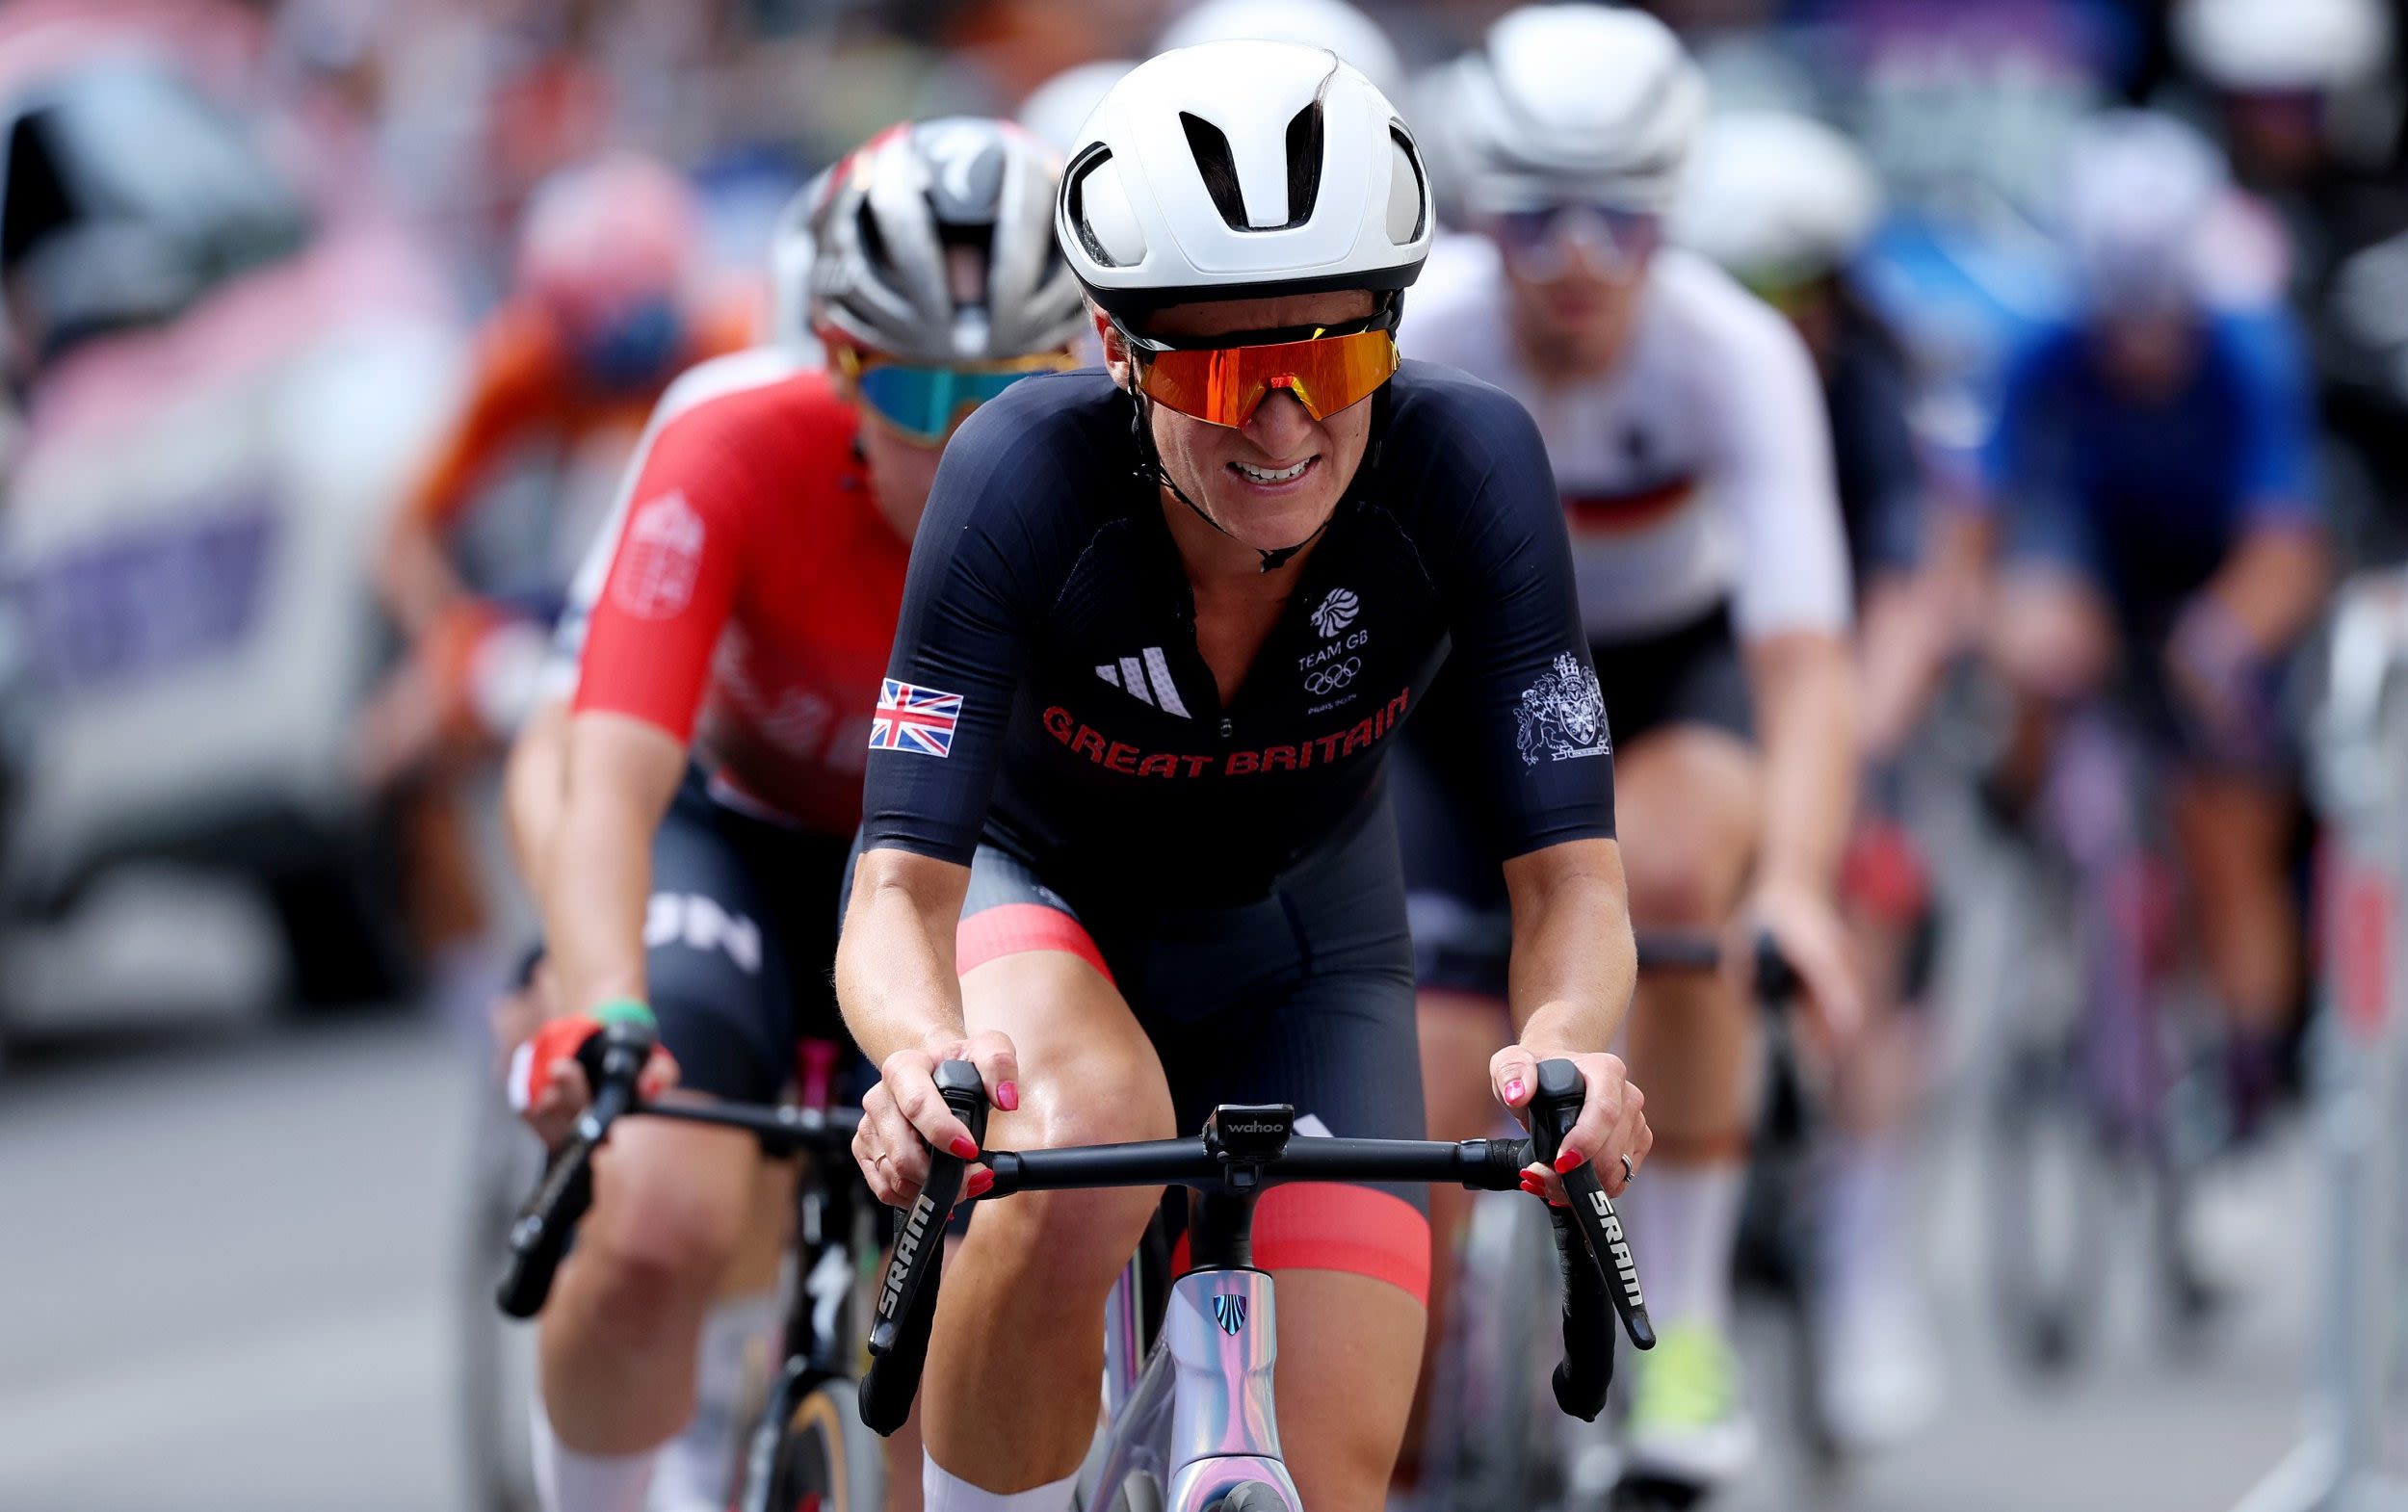 Lizzie Deignan’s Olympic career ends 10 days after being ‘medical emergency’ hospitalisation